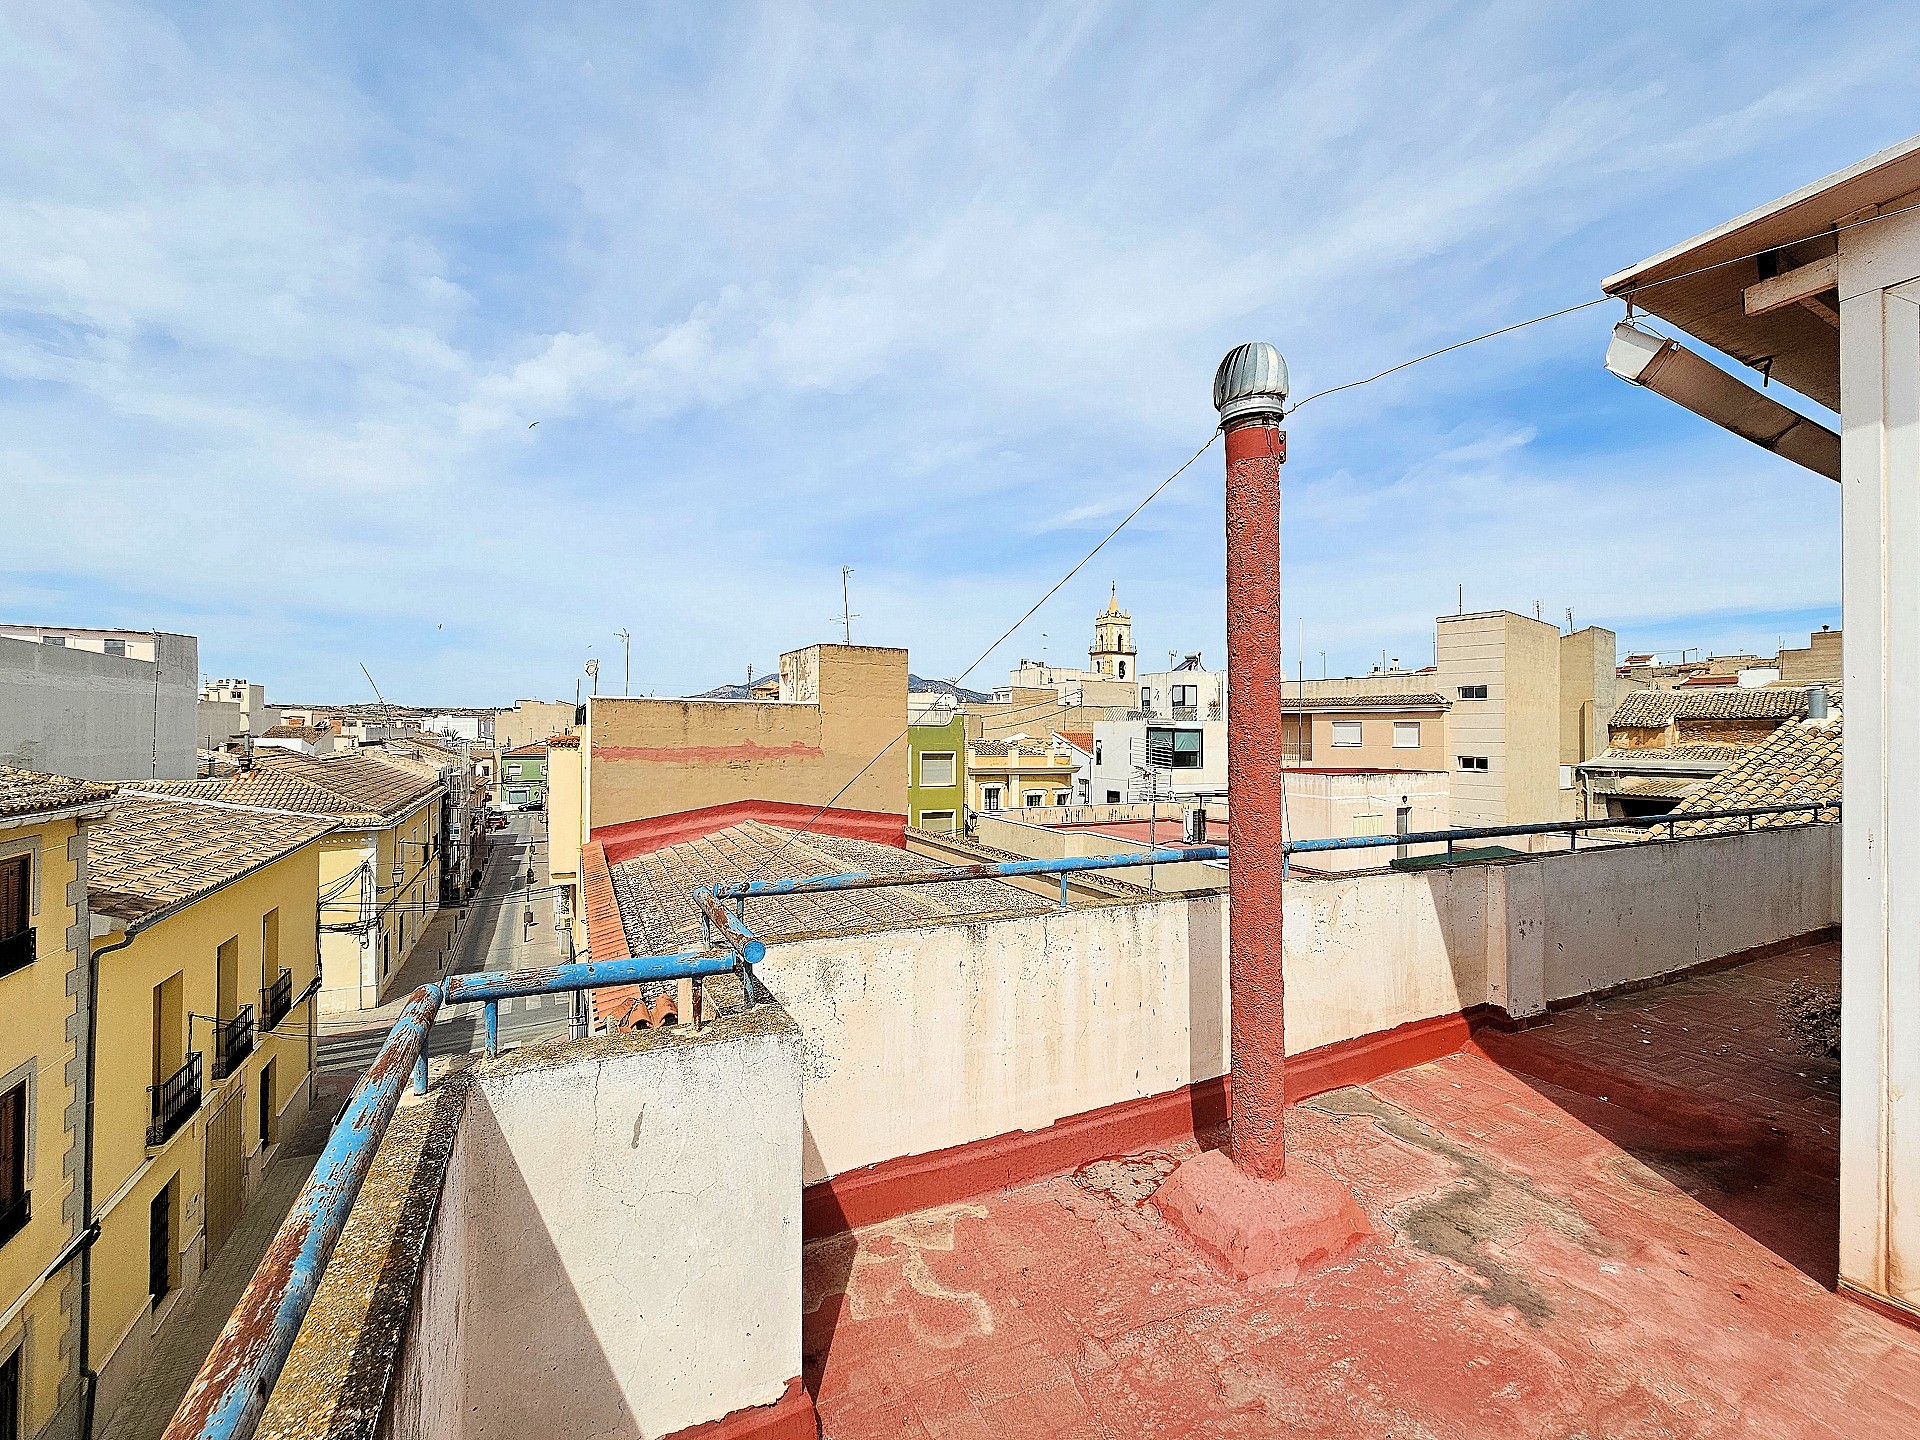 Townhouse for sale in Alicante 29